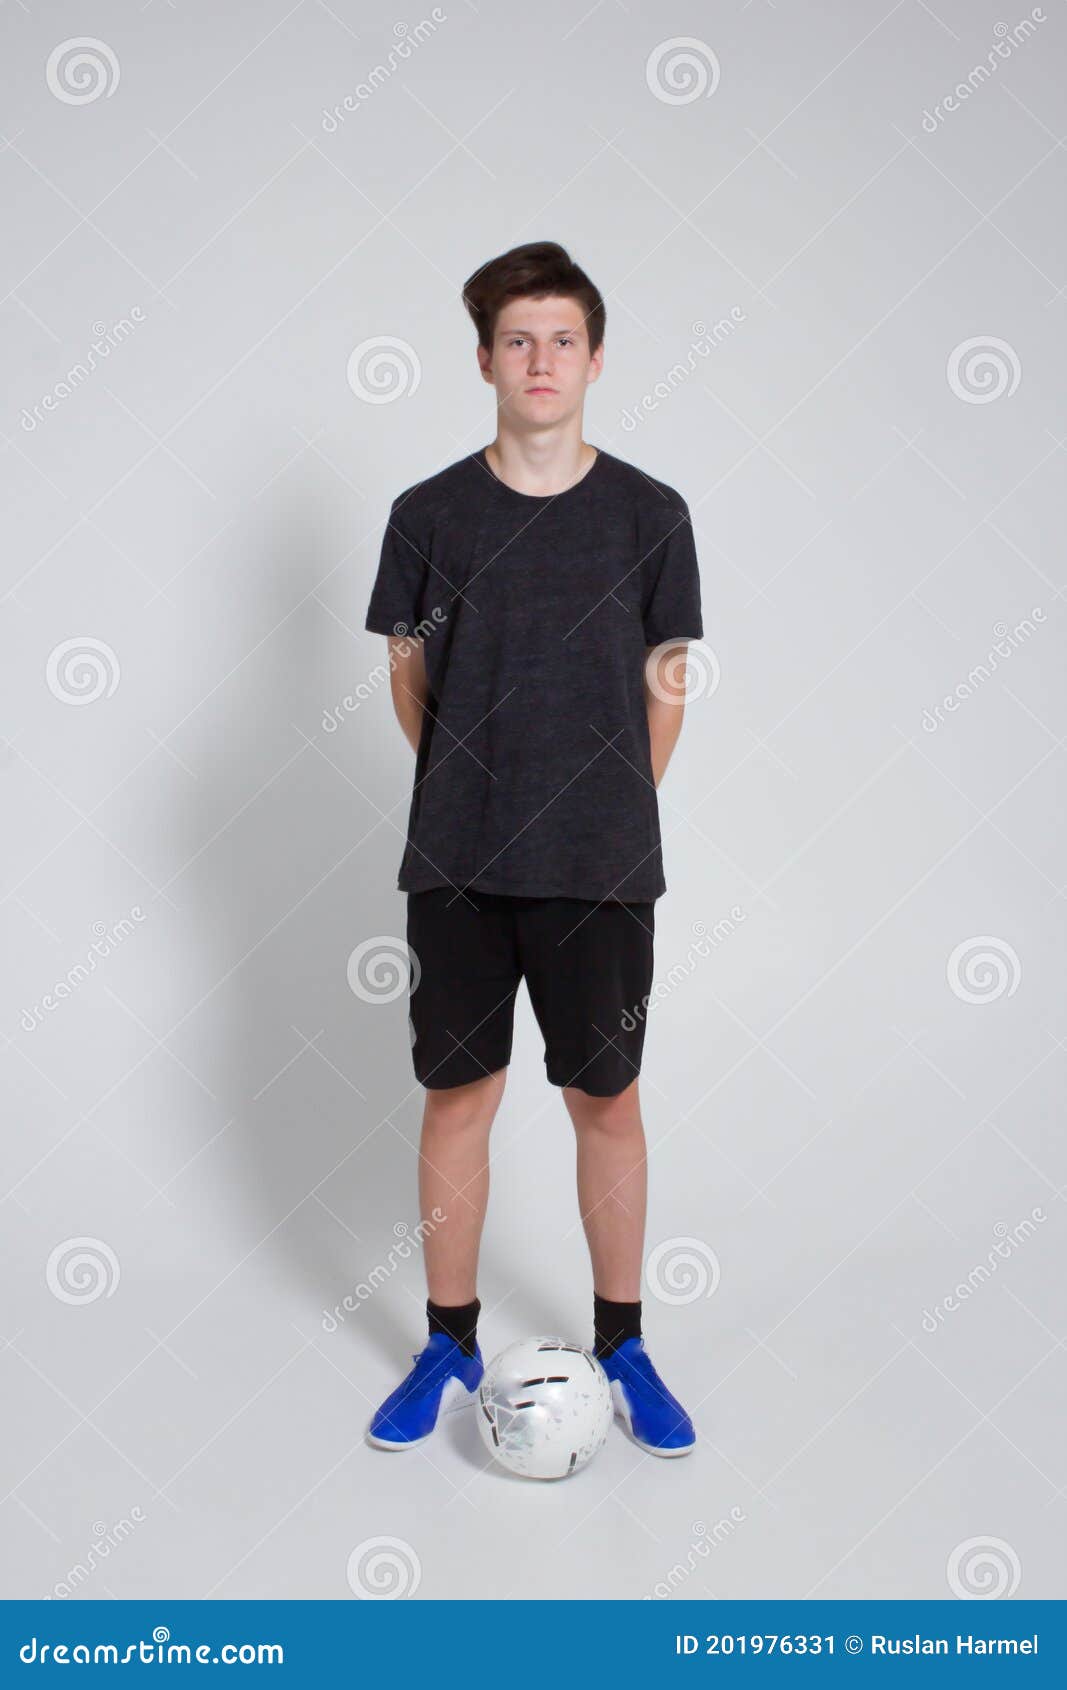 Young Man in Blue Soccer T-Shirt and Black Shorts Standing Beside